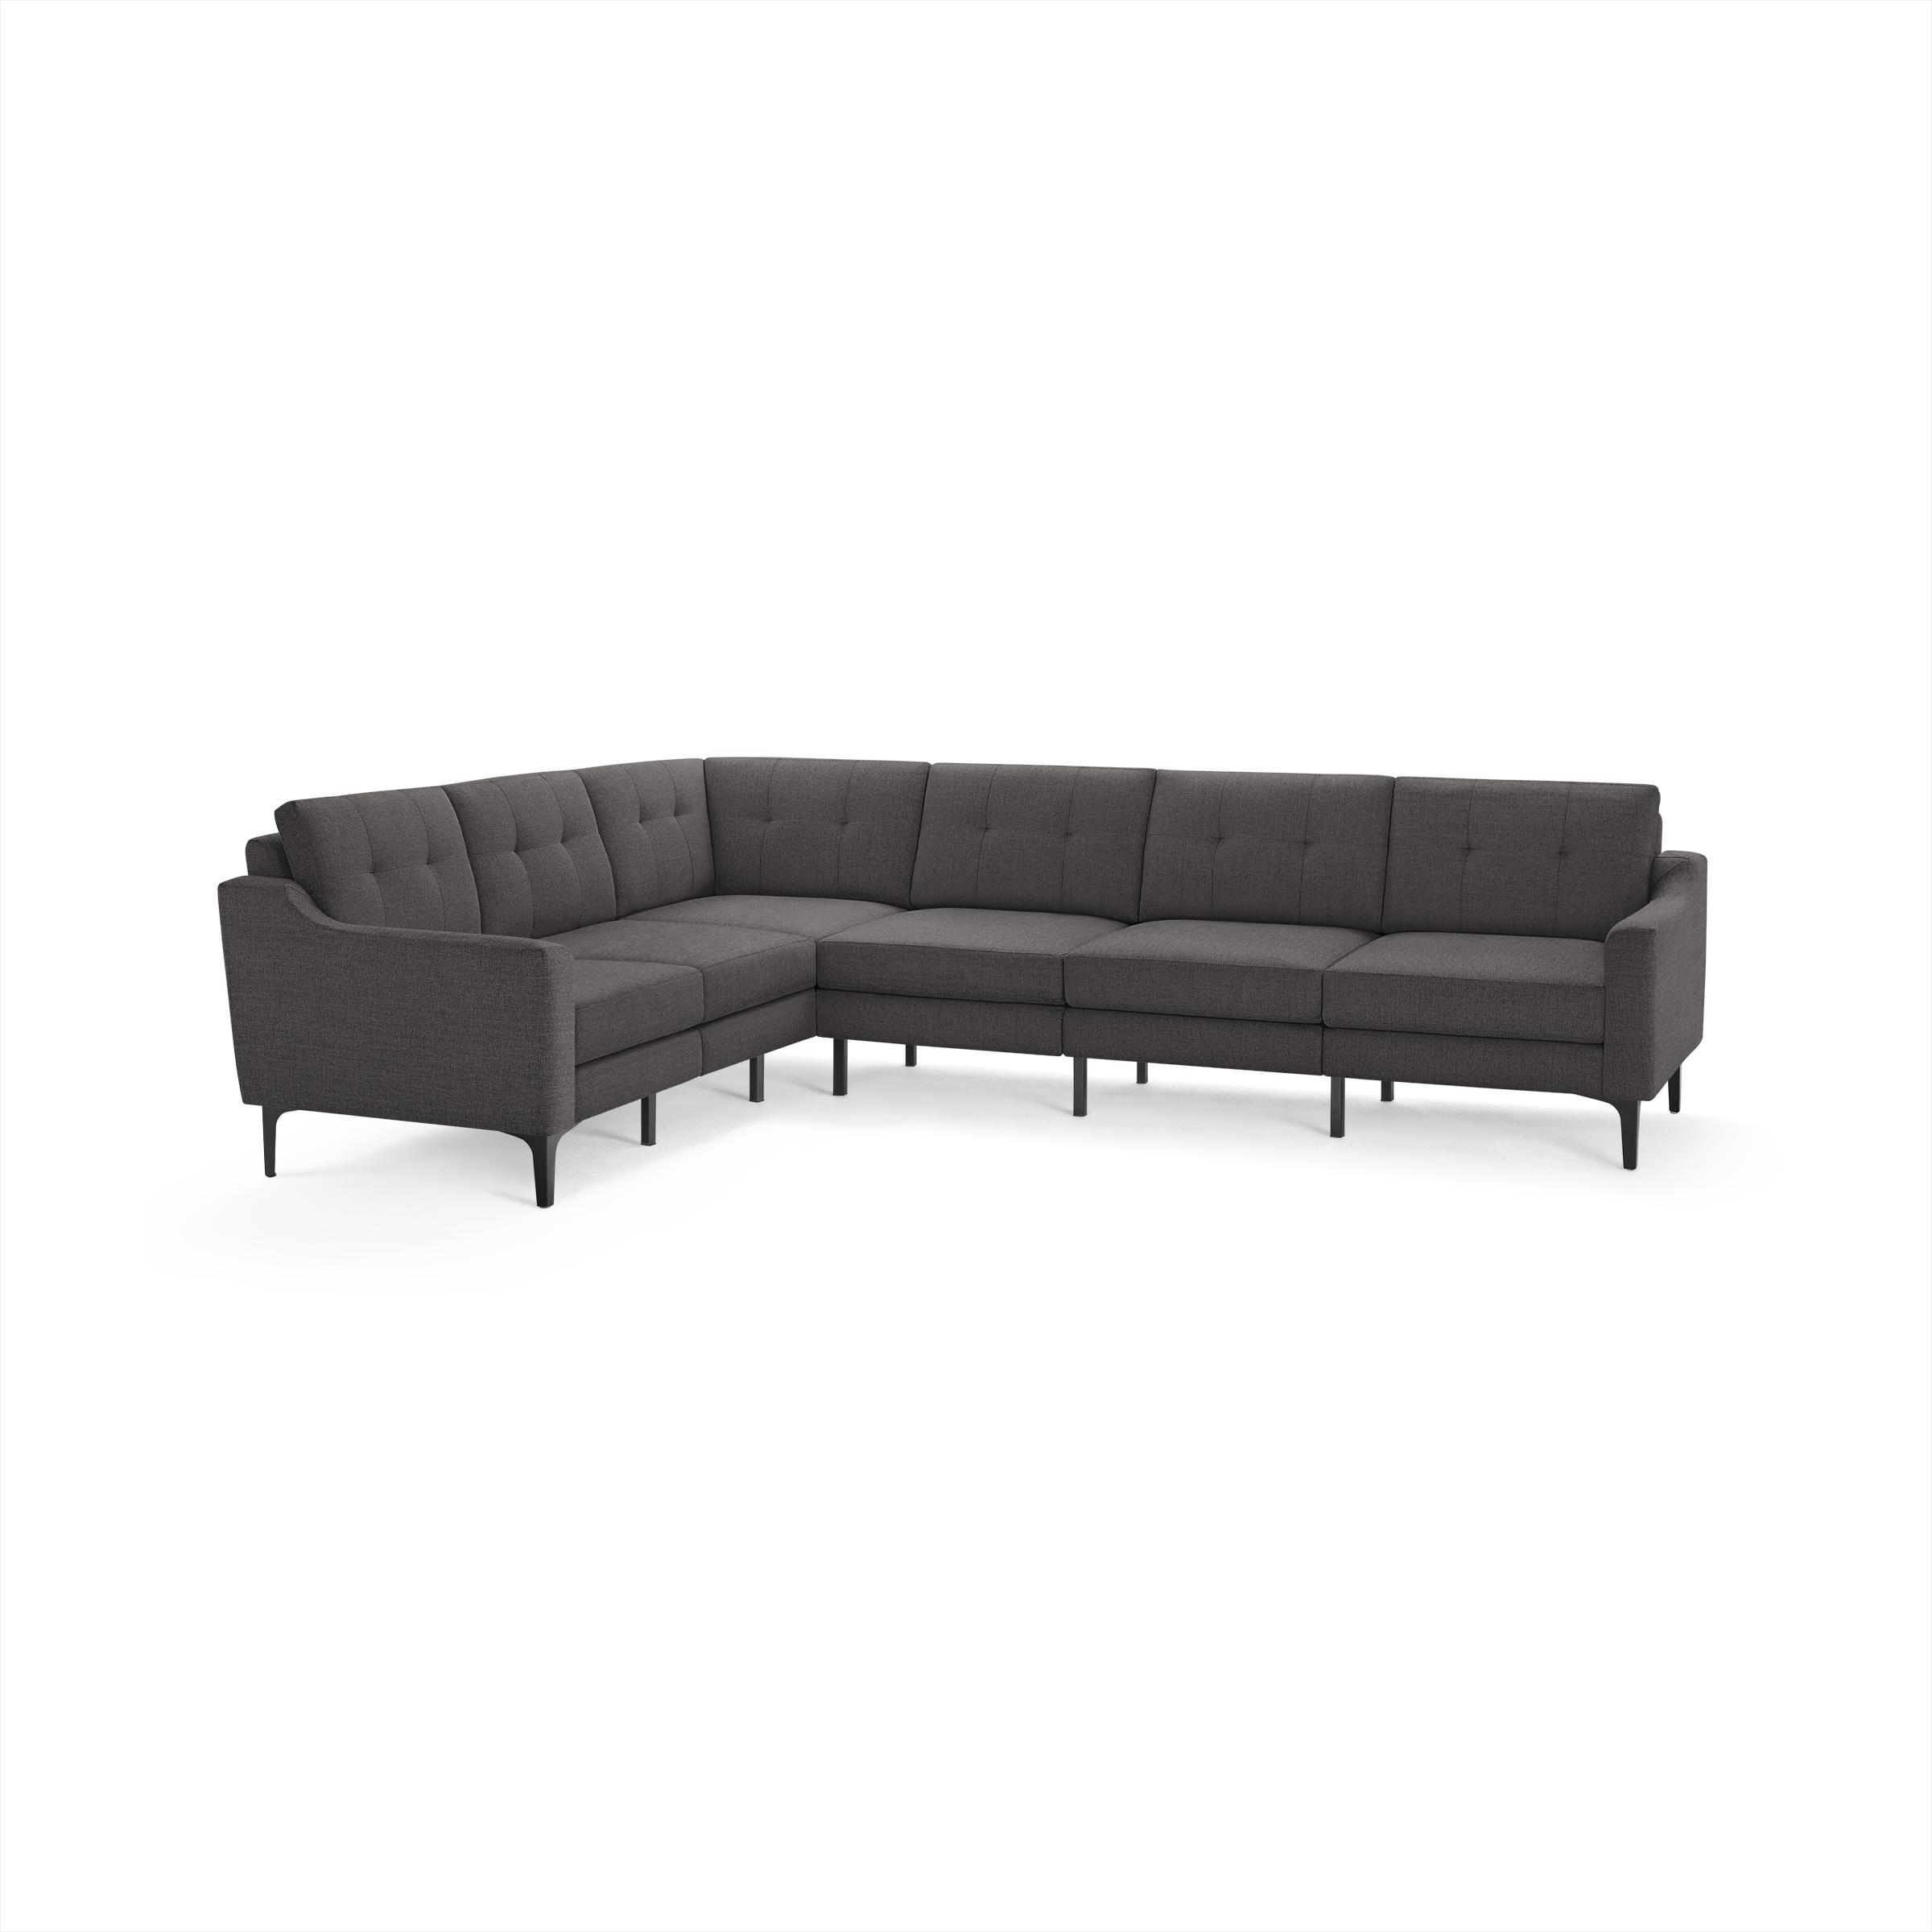 Nomad 6-Seat Corner Sectional in Charcoal - Image 2